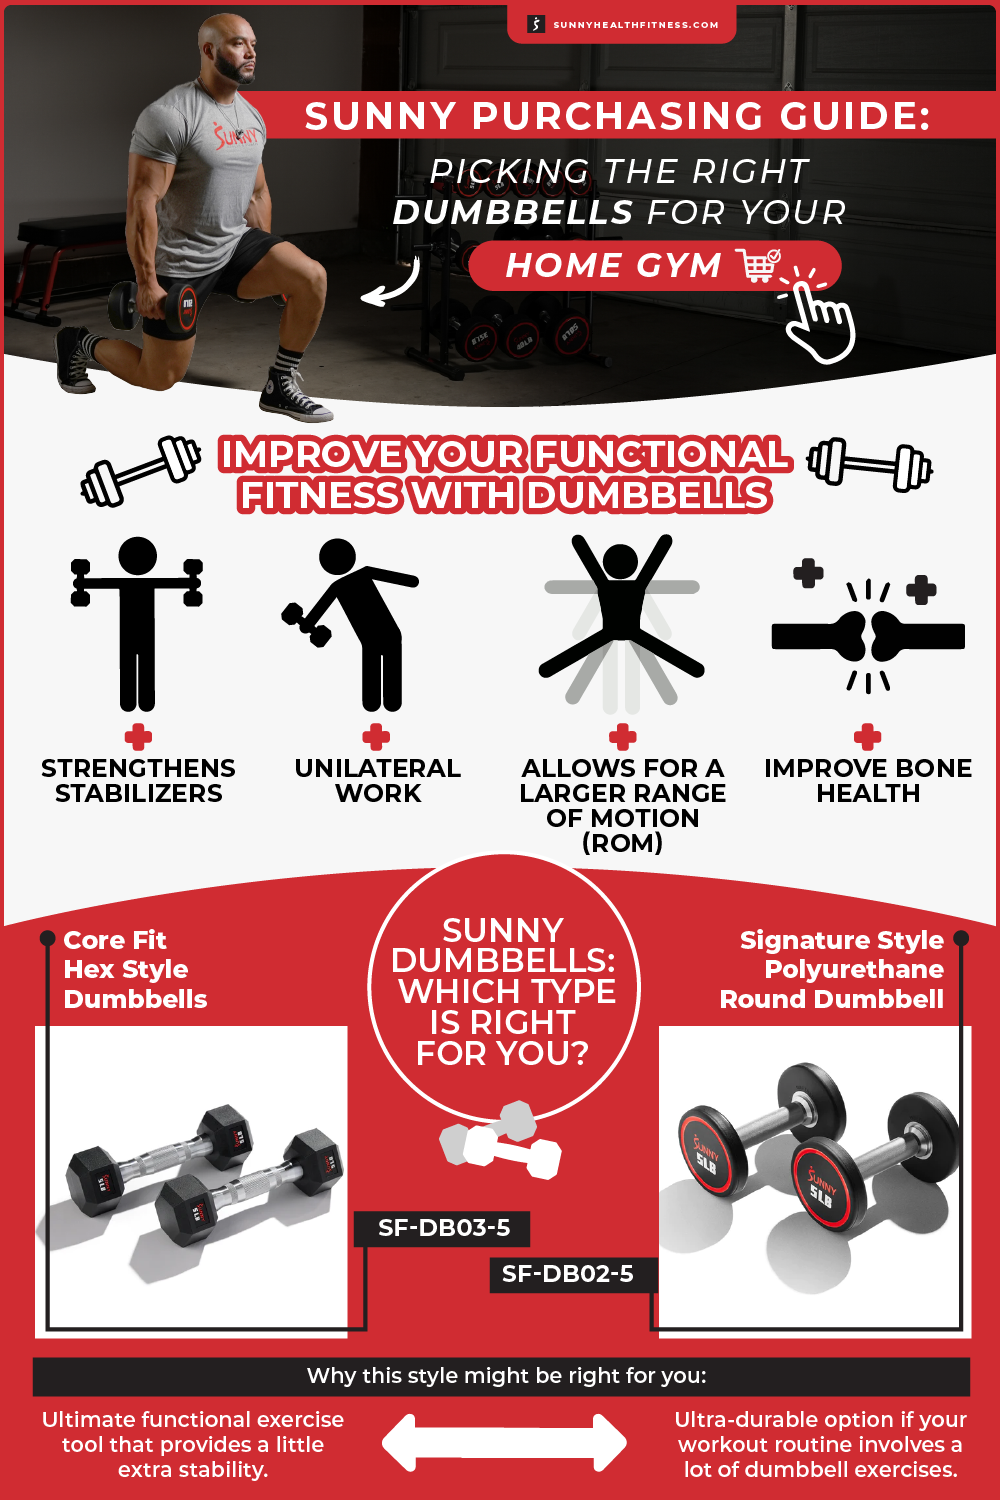 Sunny Dumbbell Purchasing Guide Infographic